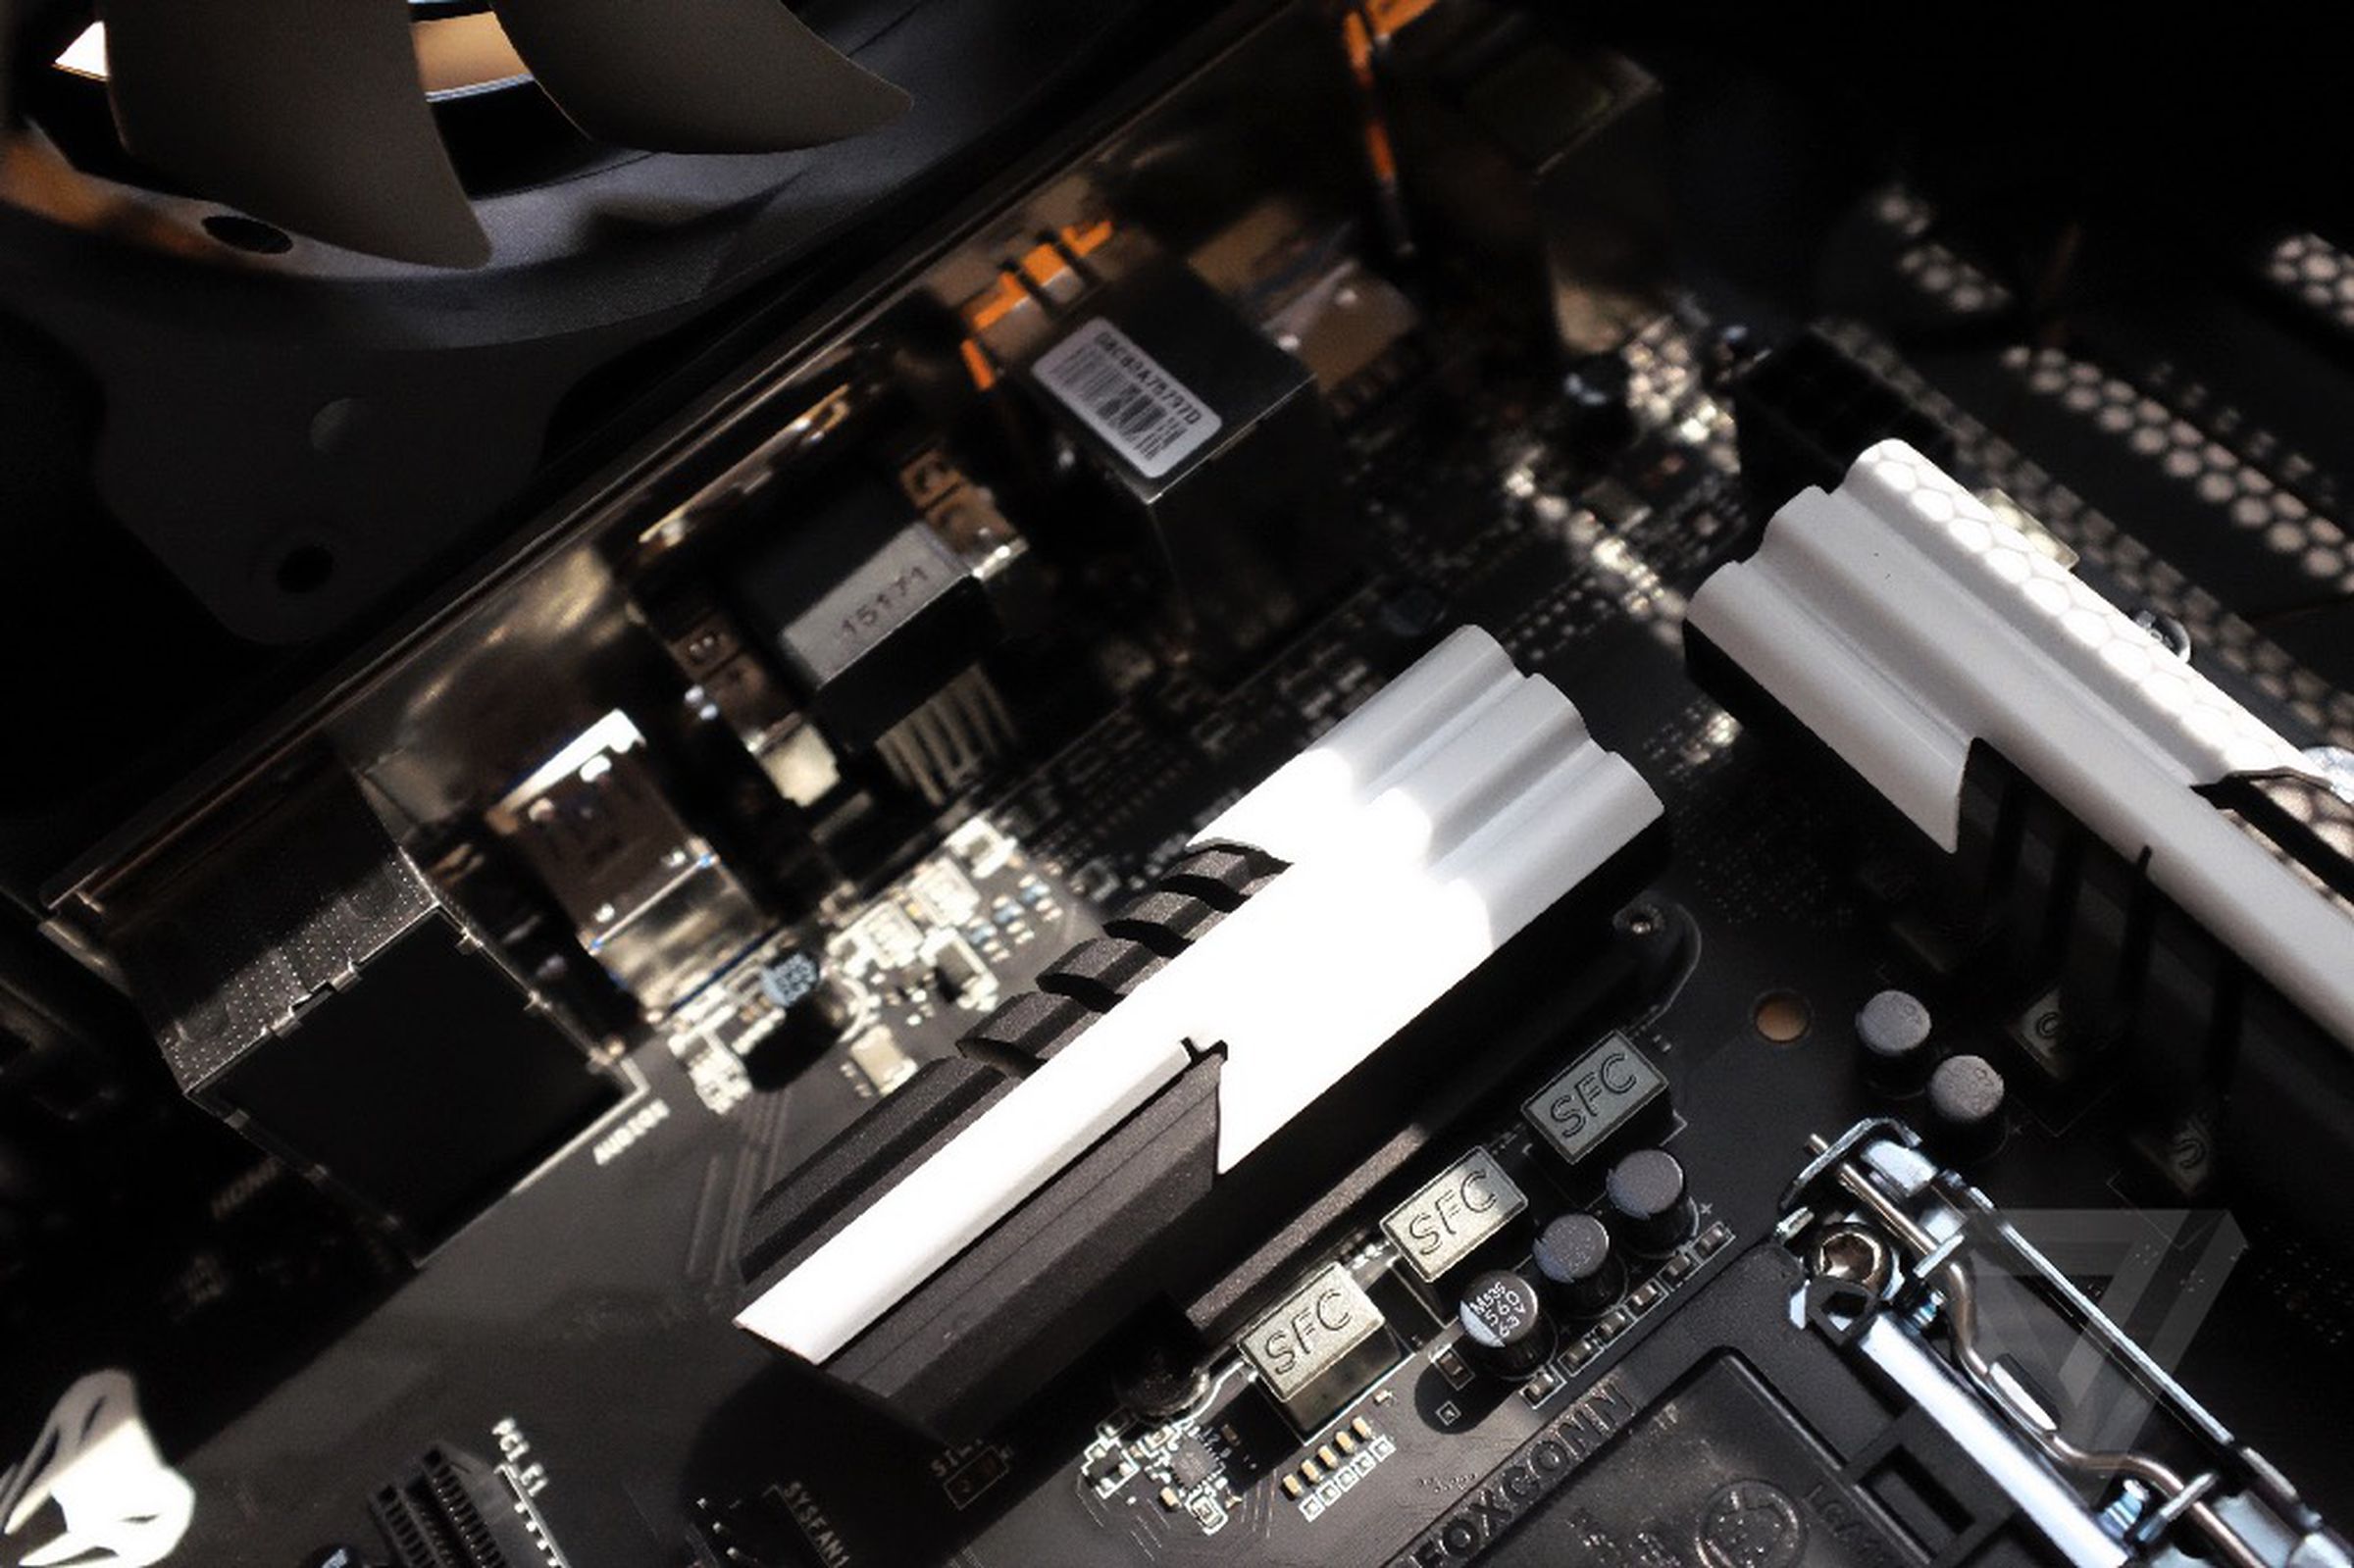 The joy of building a PC, in photos